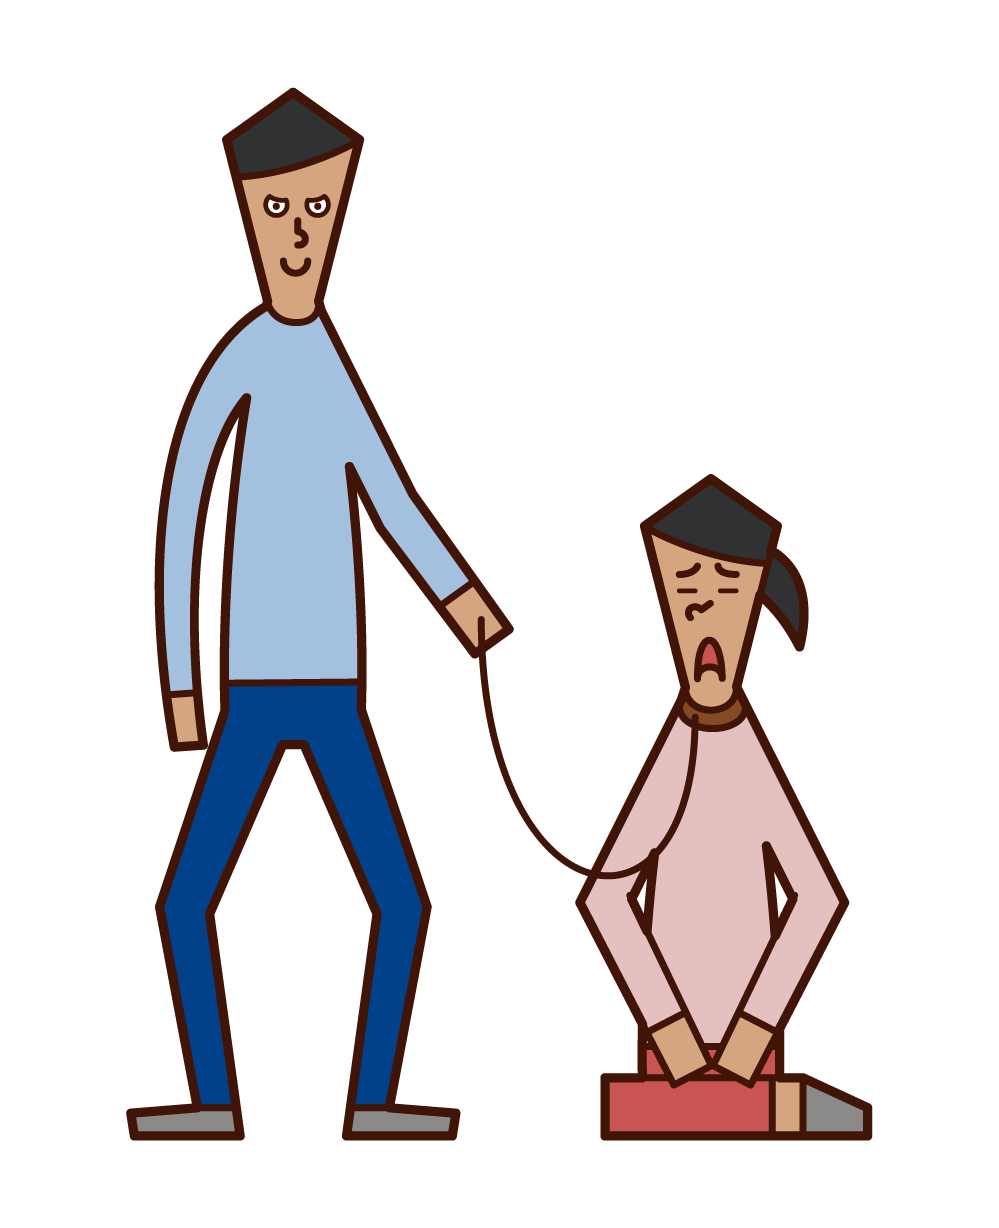 Illustration of a man (male) who submits a woman